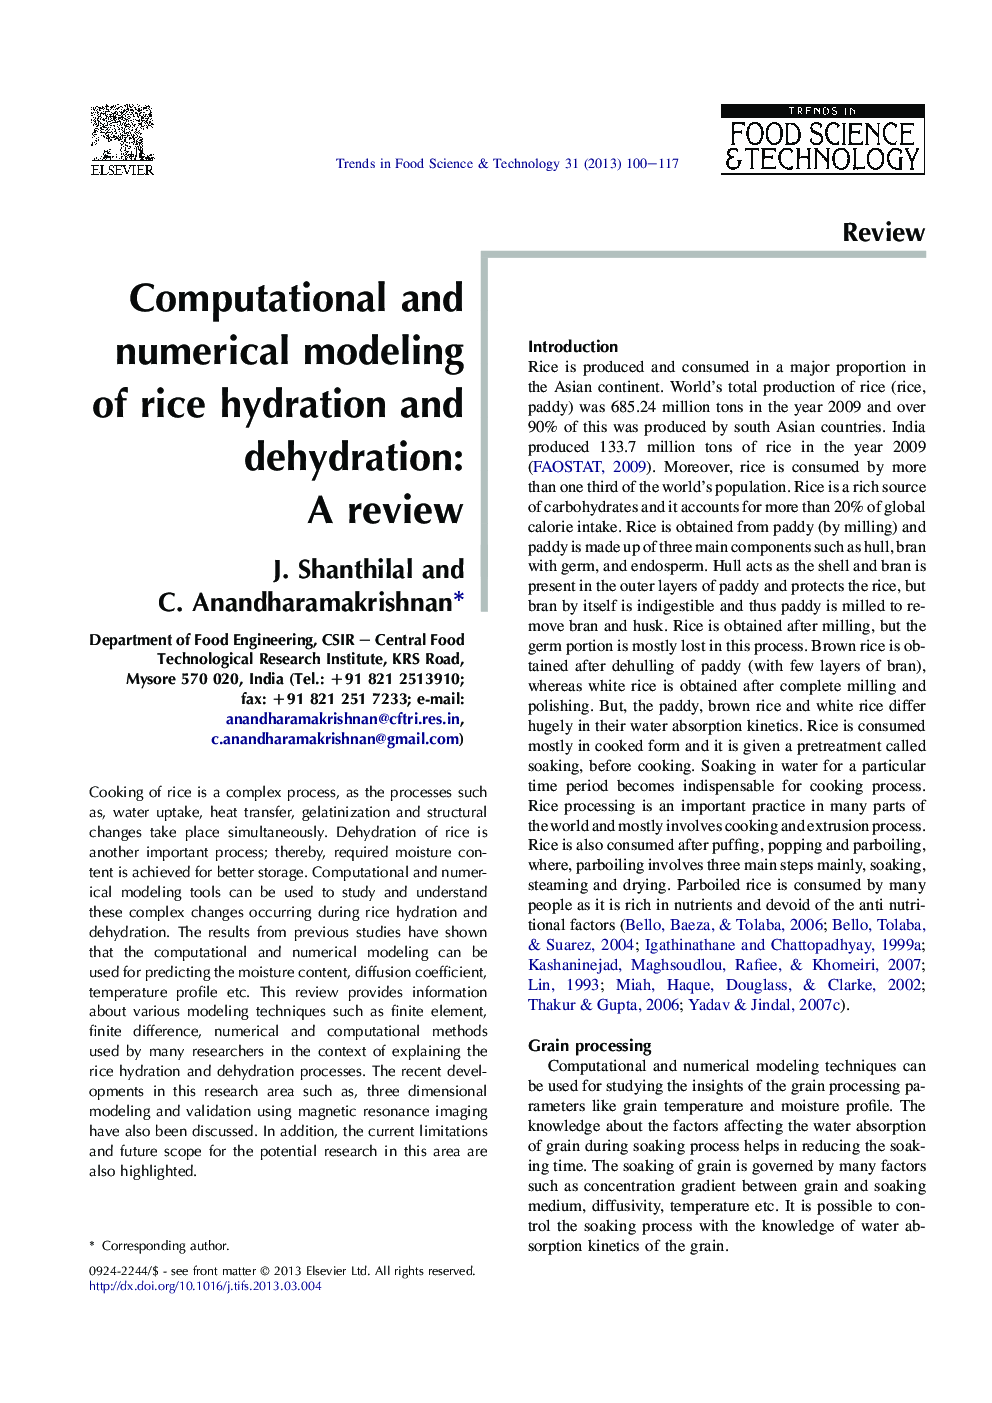 Computational and numerical modeling of rice hydration and dehydration: A review